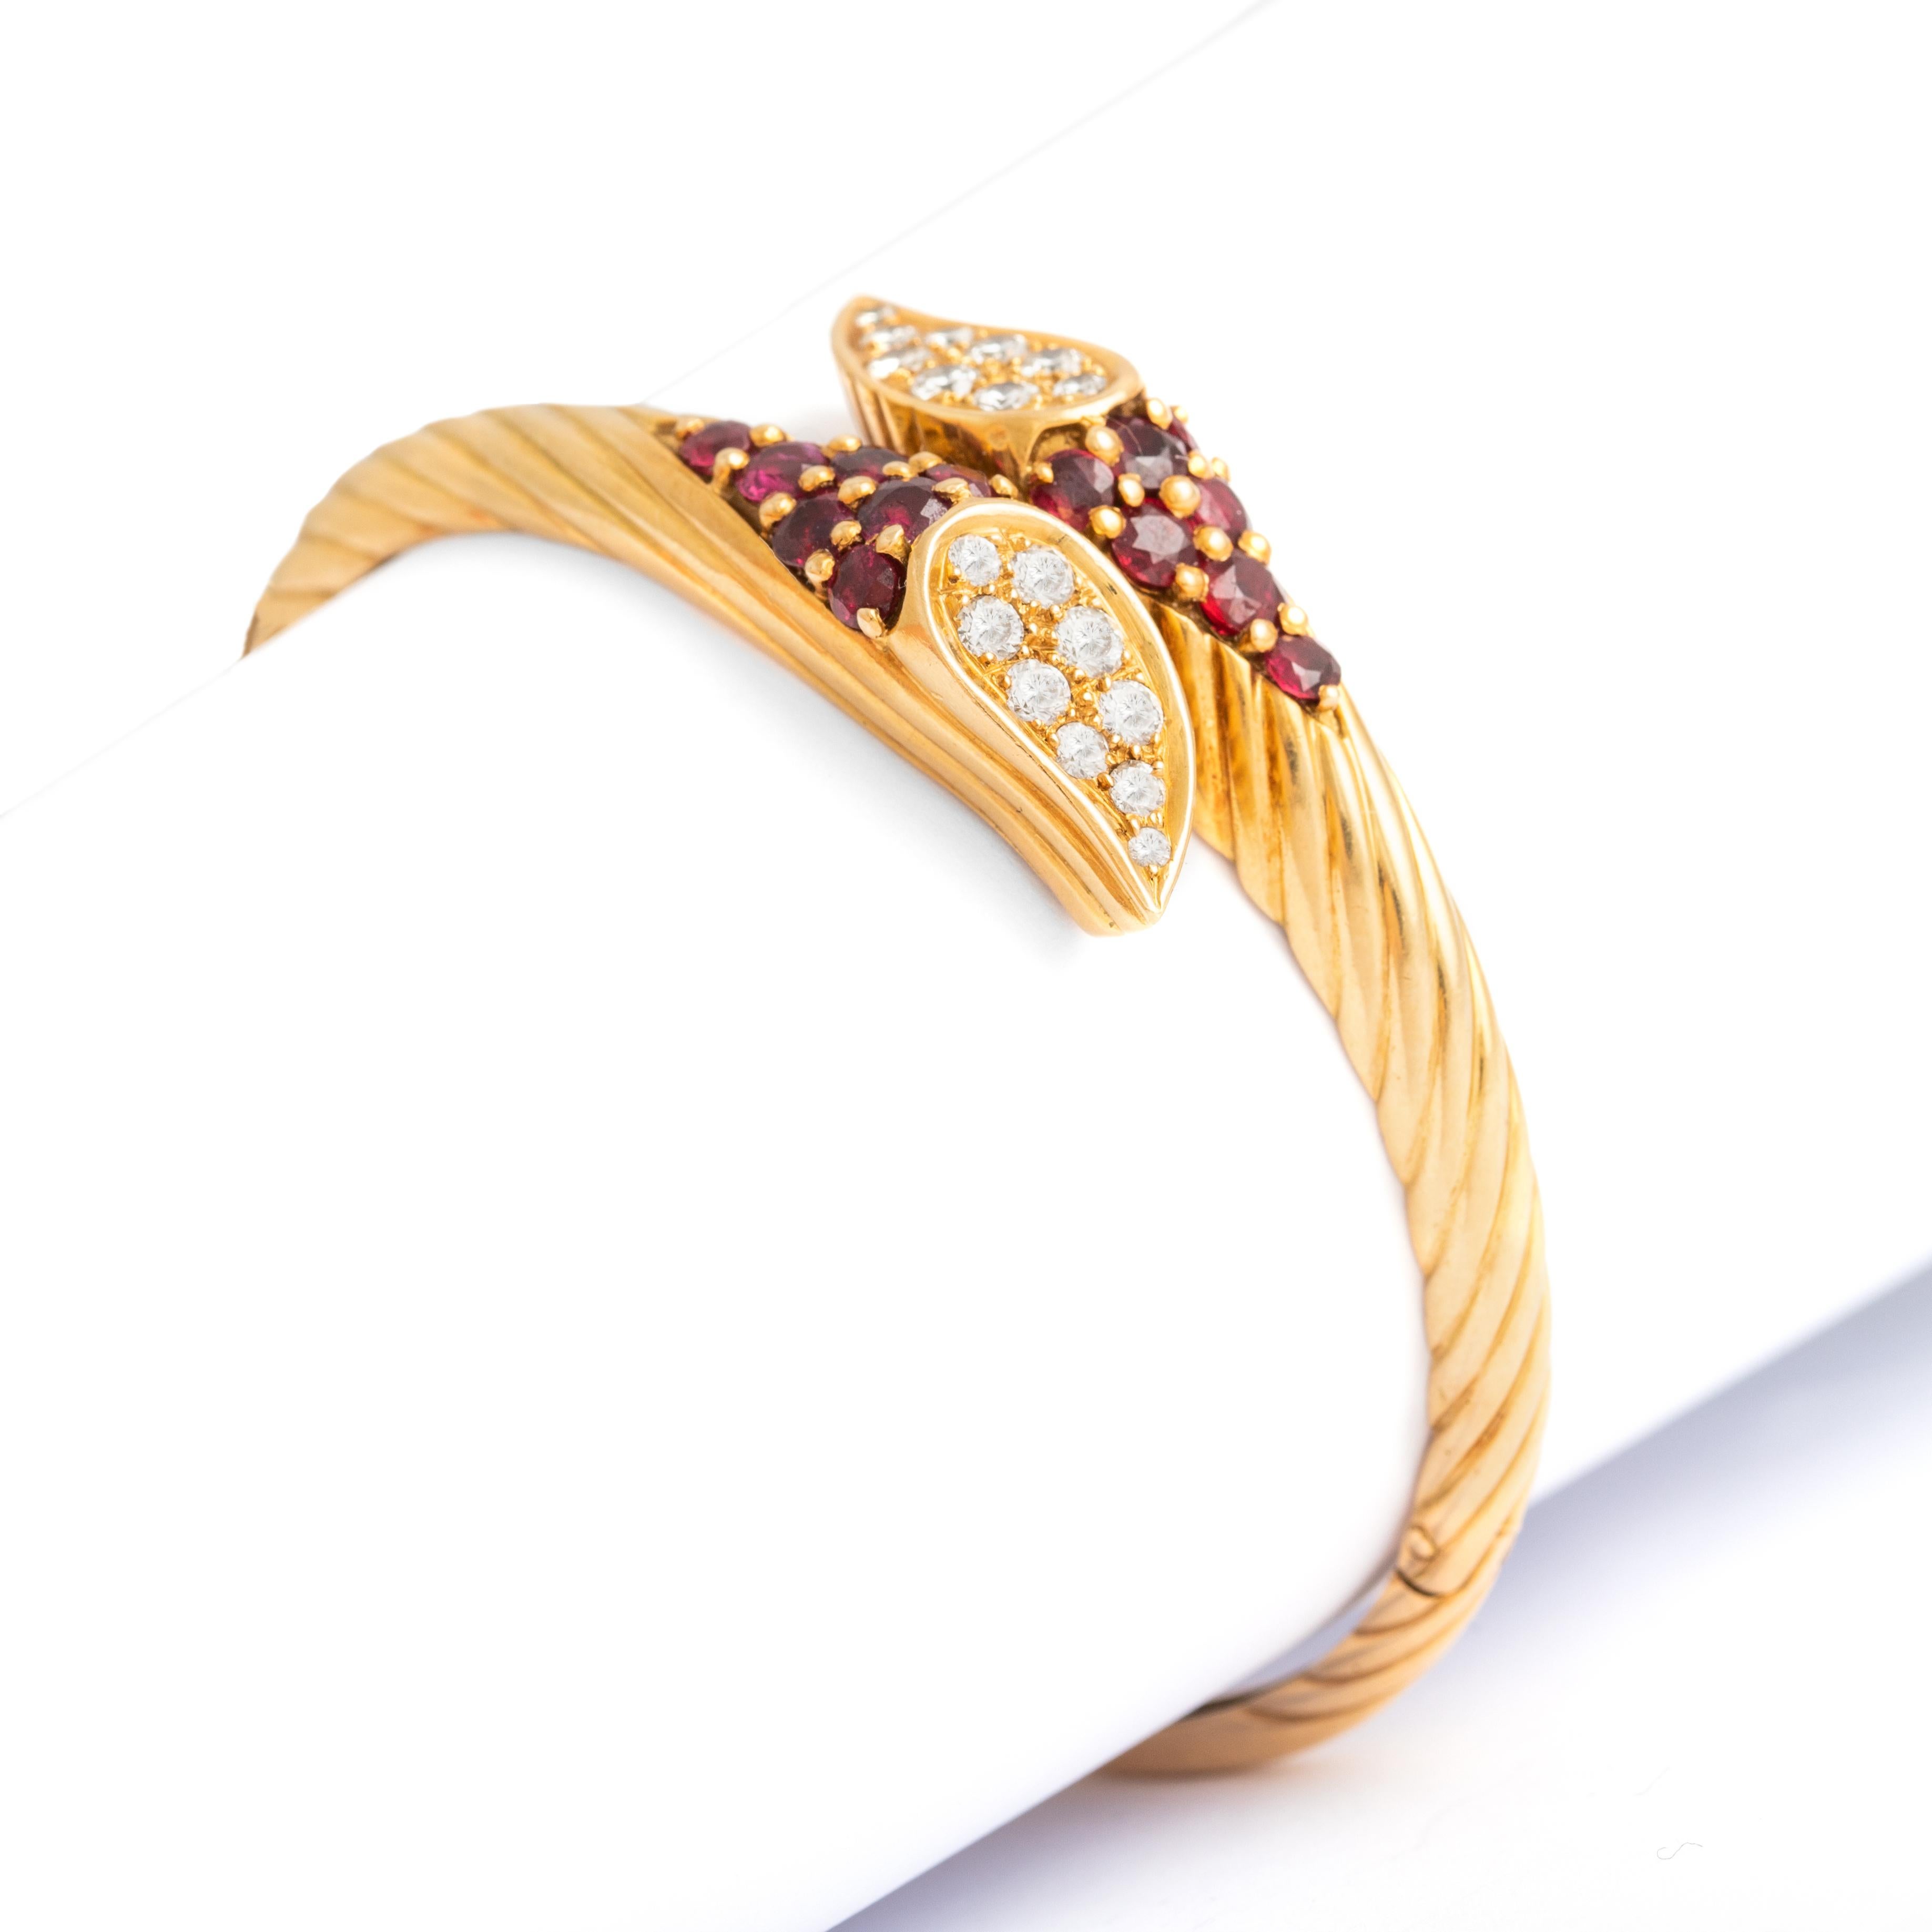 Diamond and Ruby Yellow Gold 18K Bangle.
Weight: 29.07 grams
Circumference approximately: 17.75 centimeters.